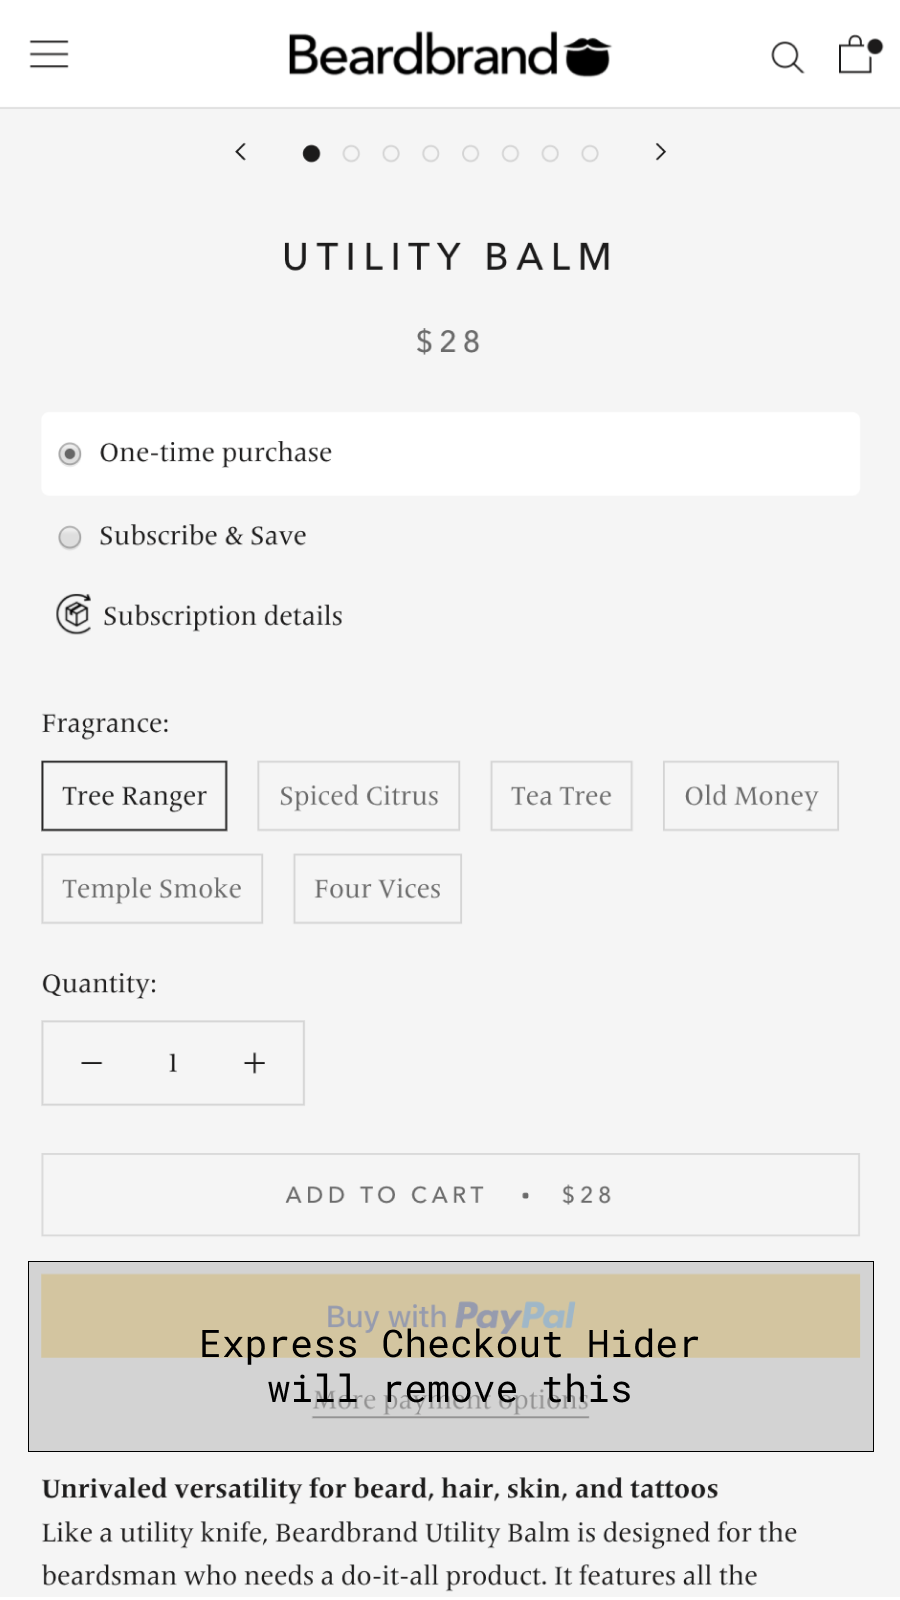 Hide Express Checkout and PayPal on product page